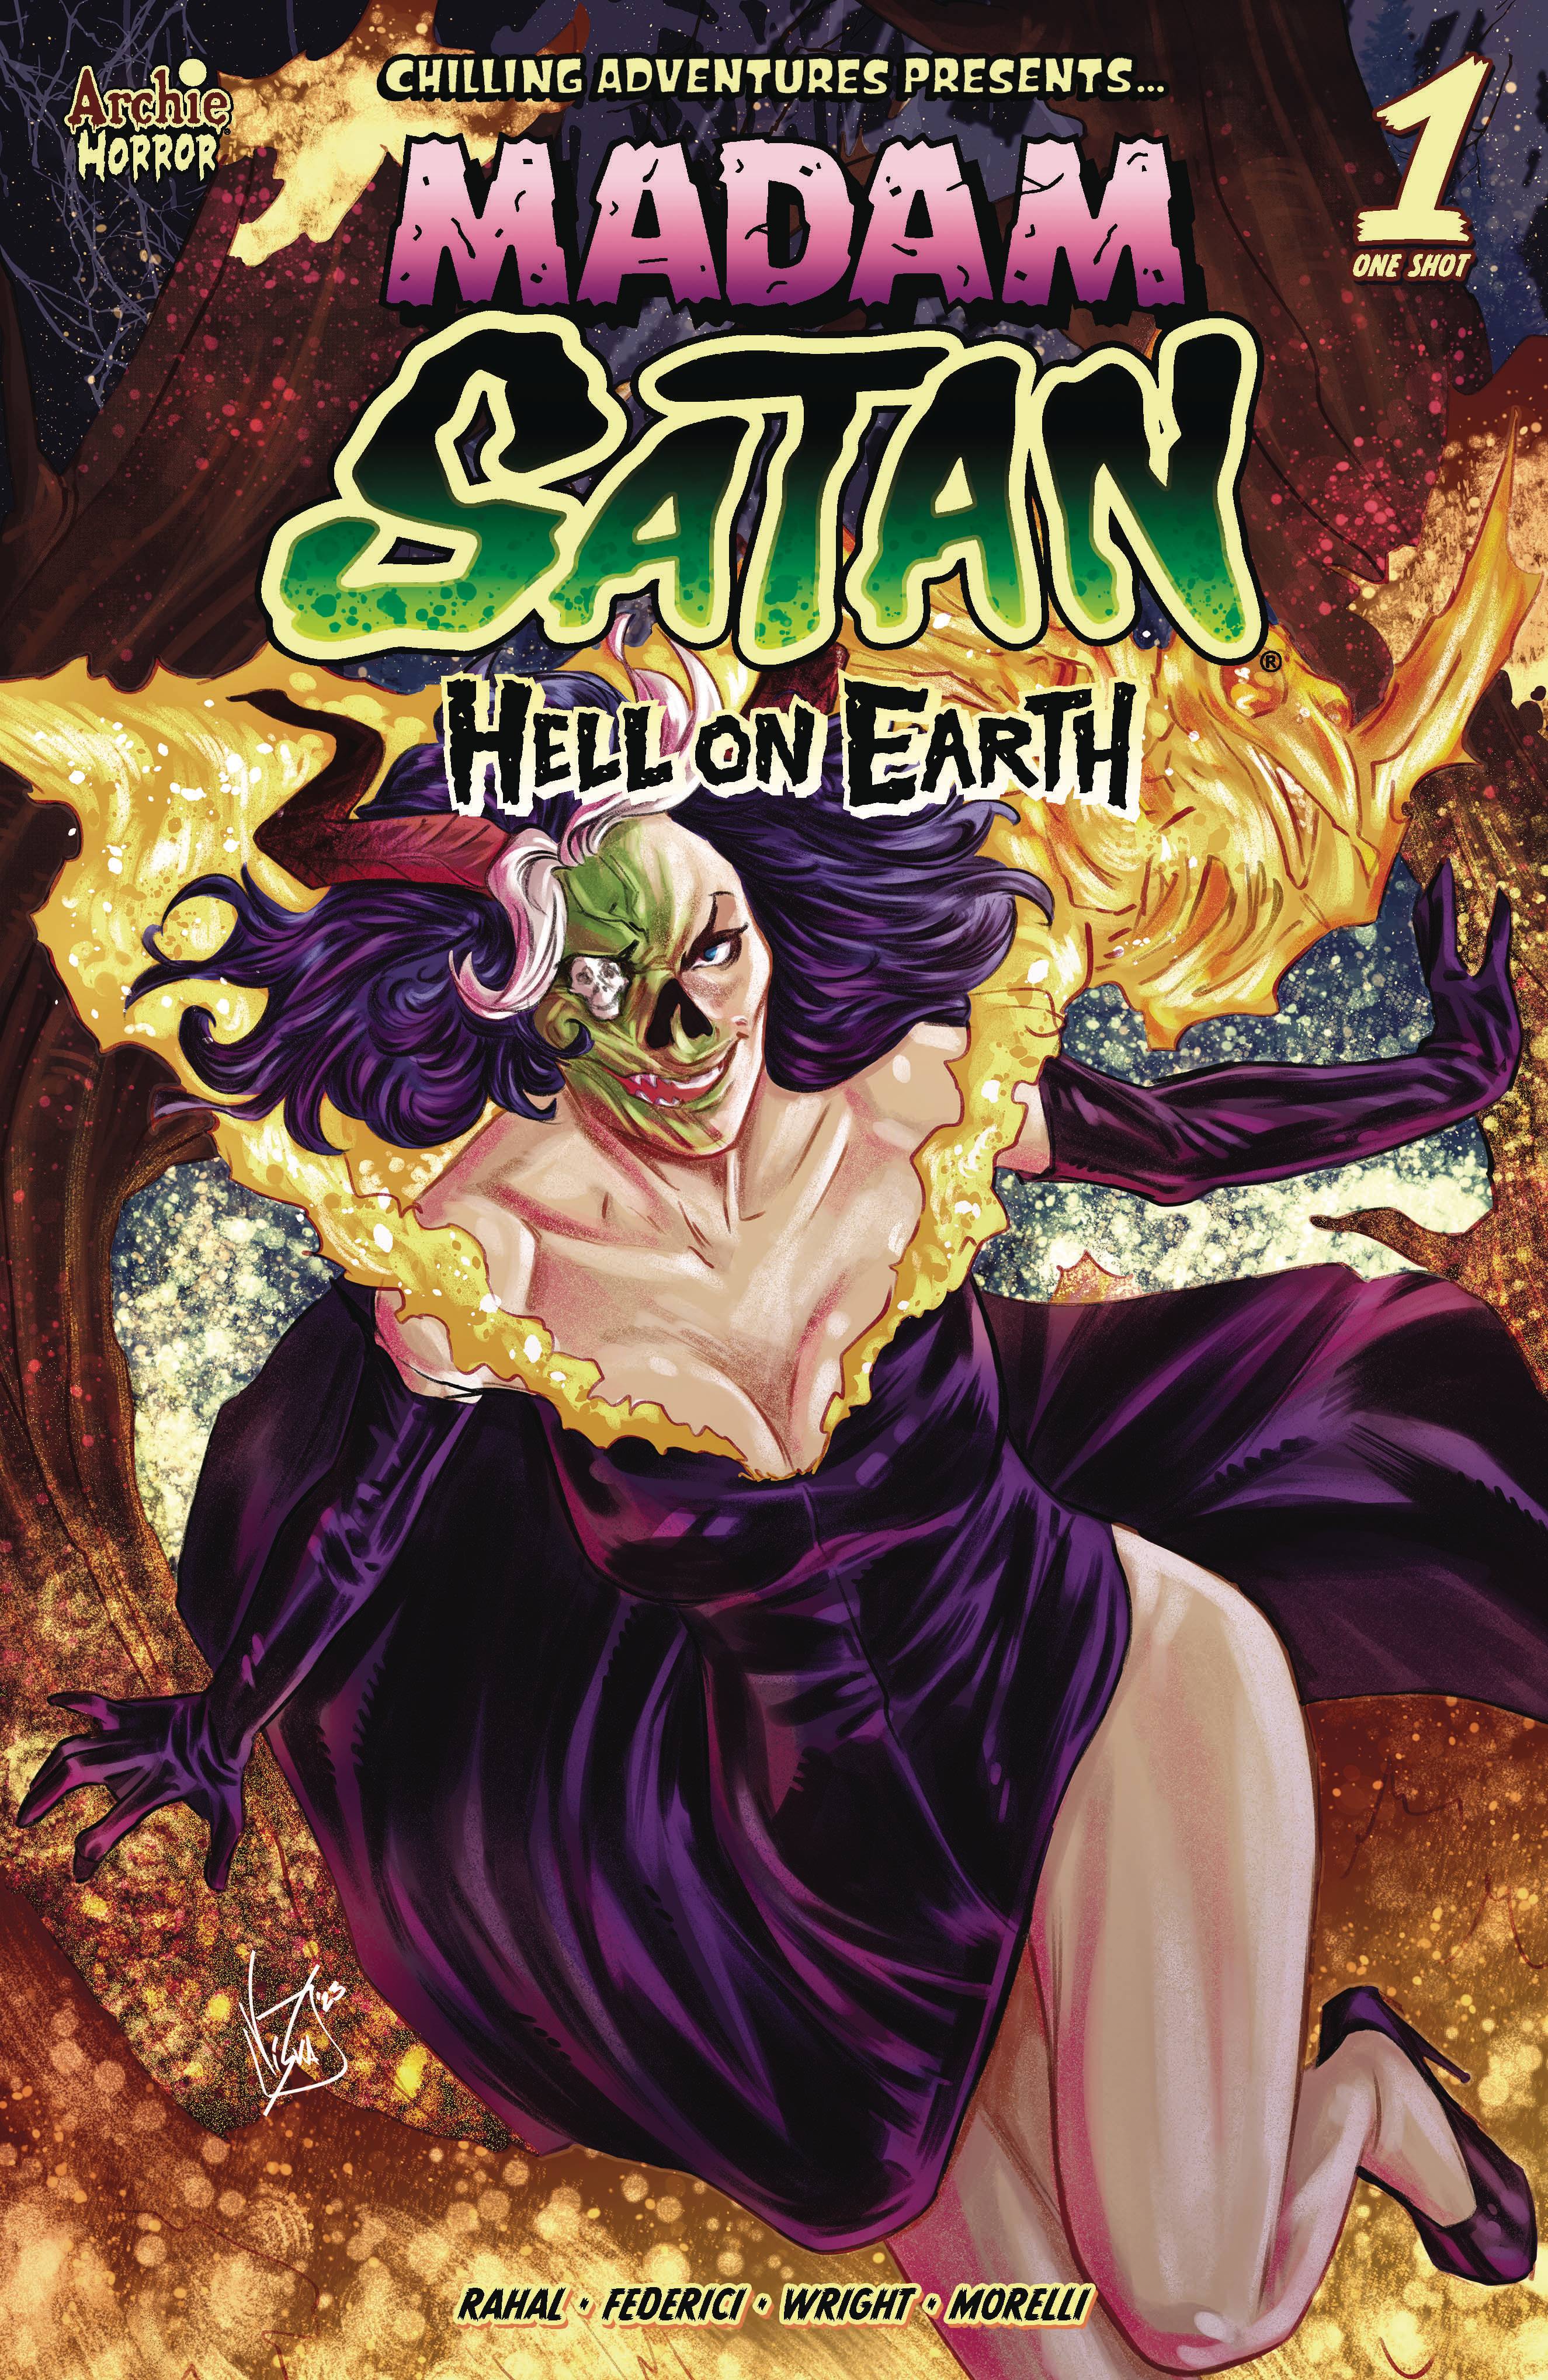 Read online Chilling Adventures Presents… Madam Satan: Hell on Earth comic -  Issue # Full - 1